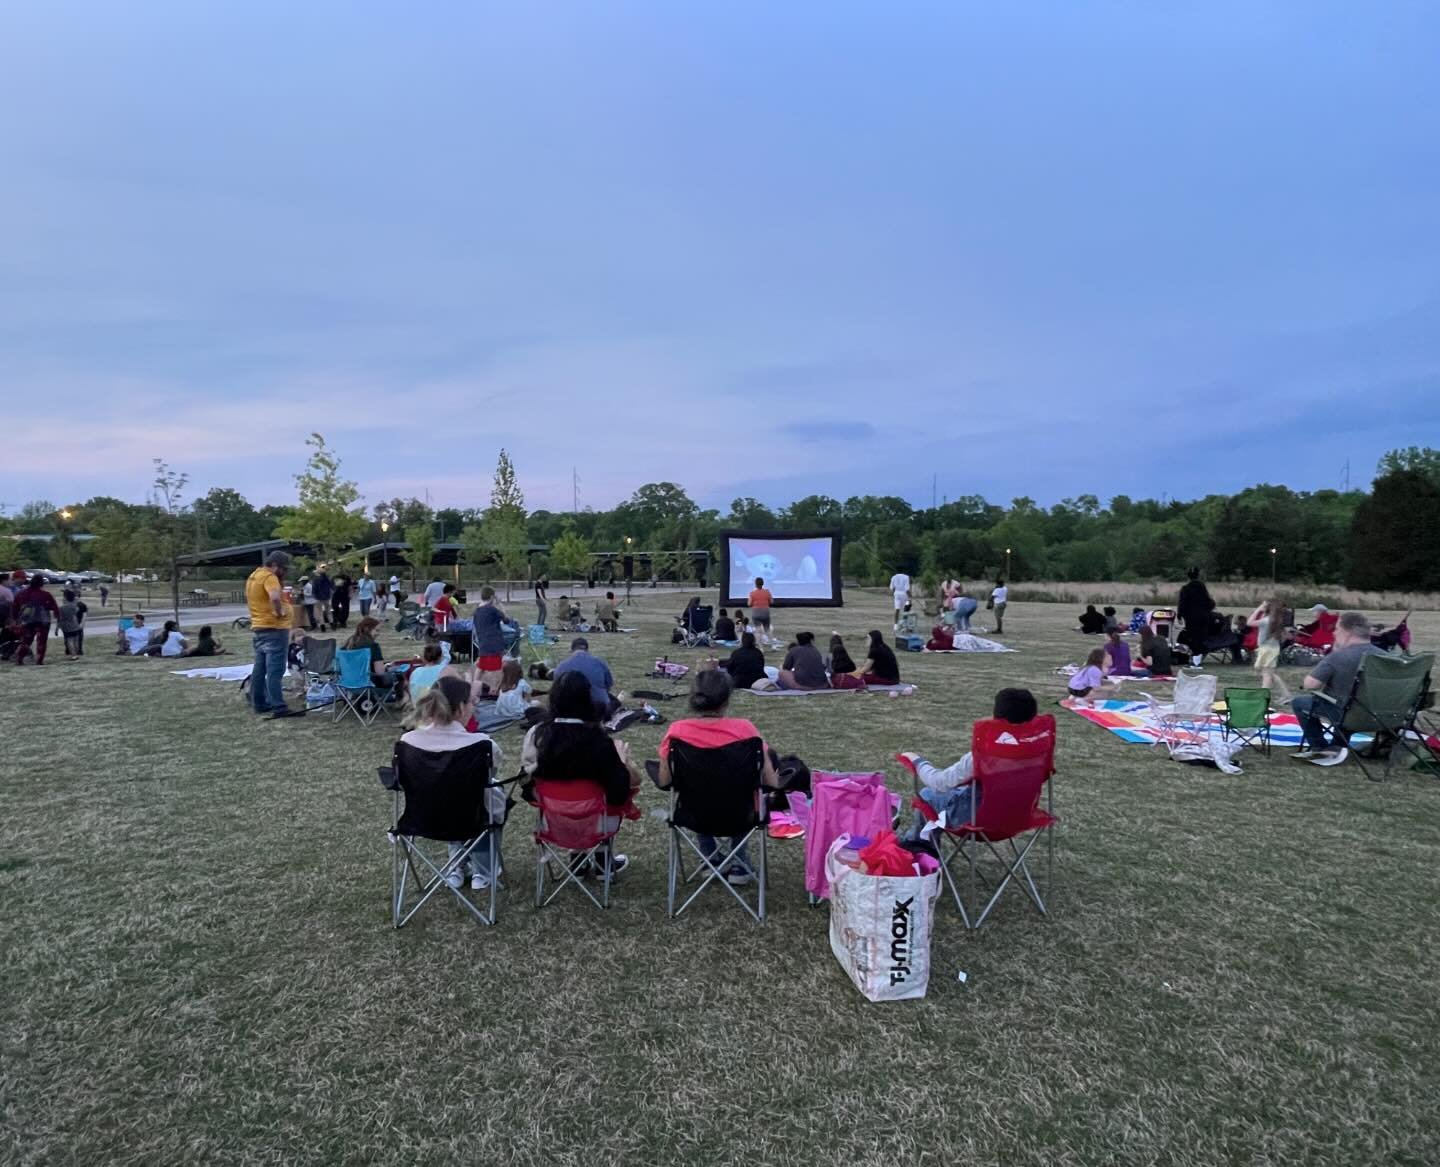 For Outside Cinema, Trolls Band Together. And the little ones dance together (swipe to see)! Join us for Wonka at Outside Cinema on Friday, May 17th, sunset.